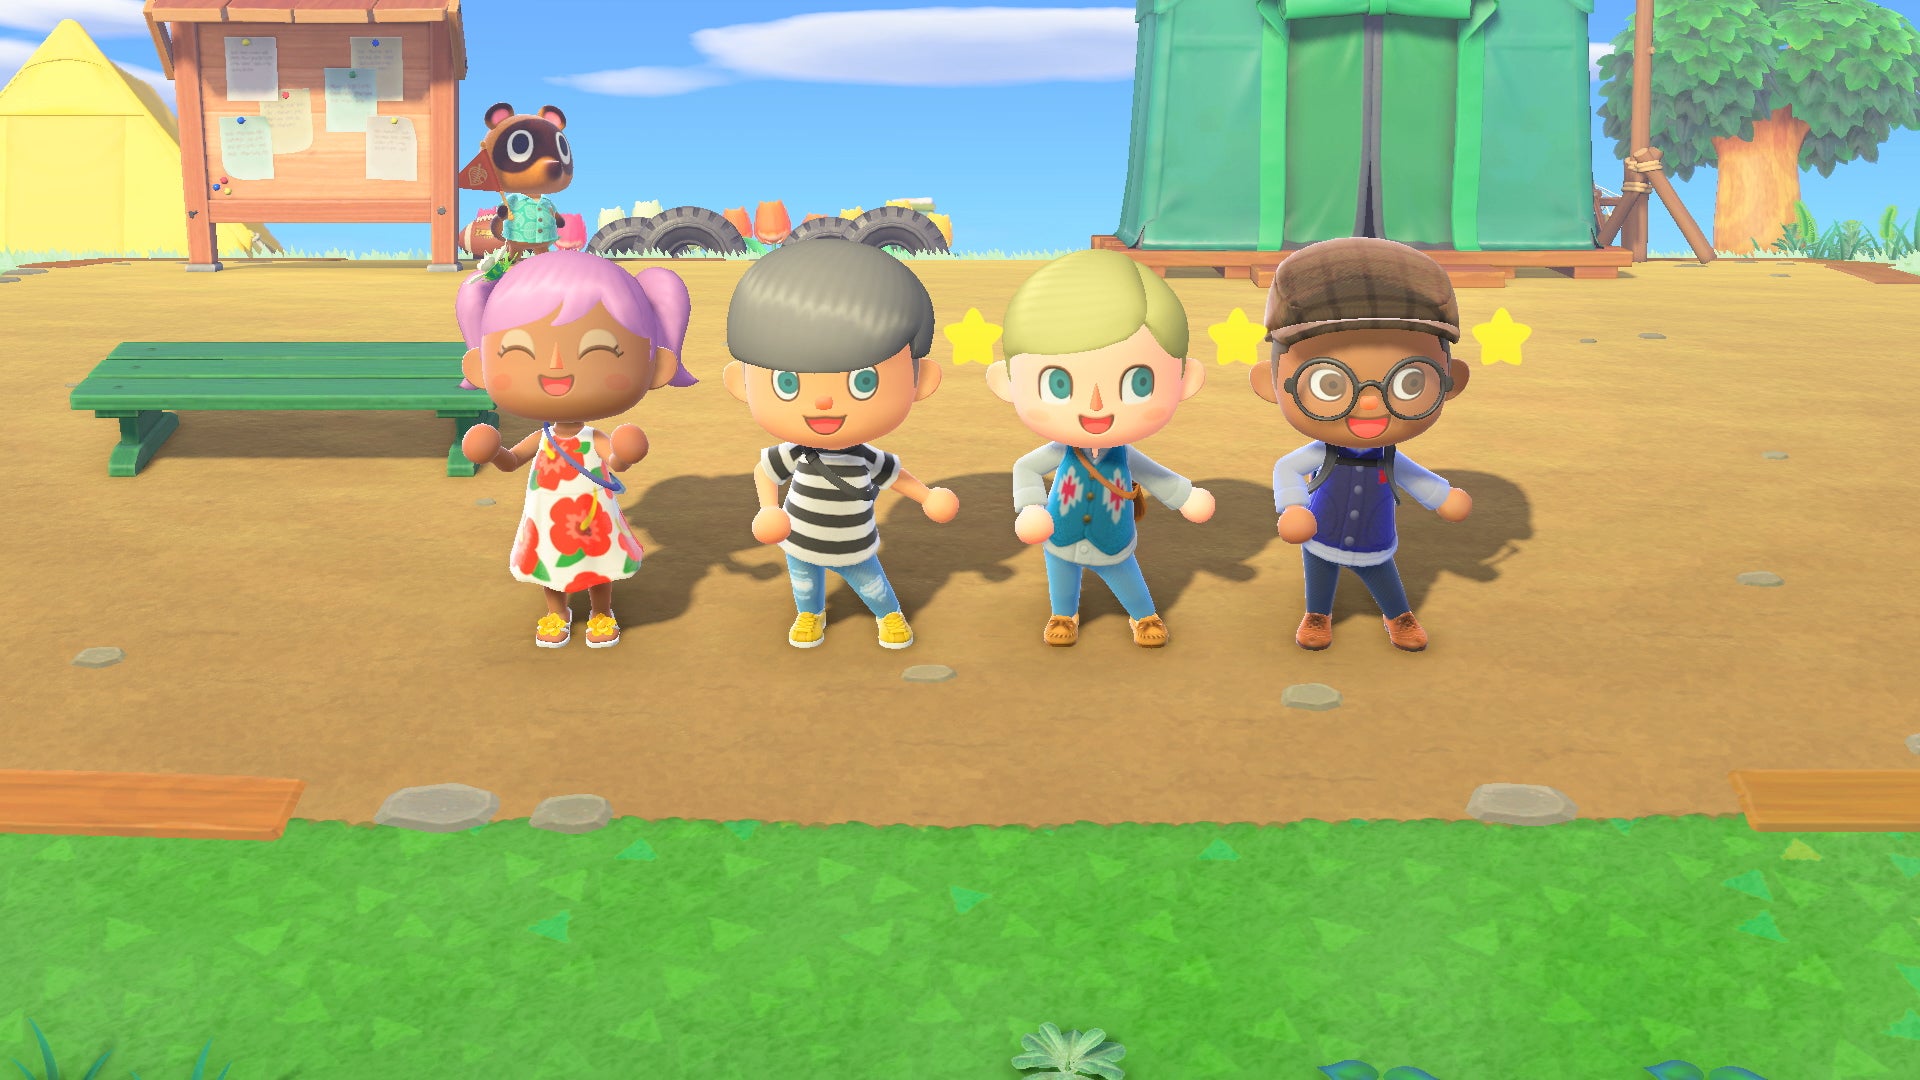 Image for Animal Crossing: New Horizons’ Able Sisters Shop Sells More Clothing Than Ever Before